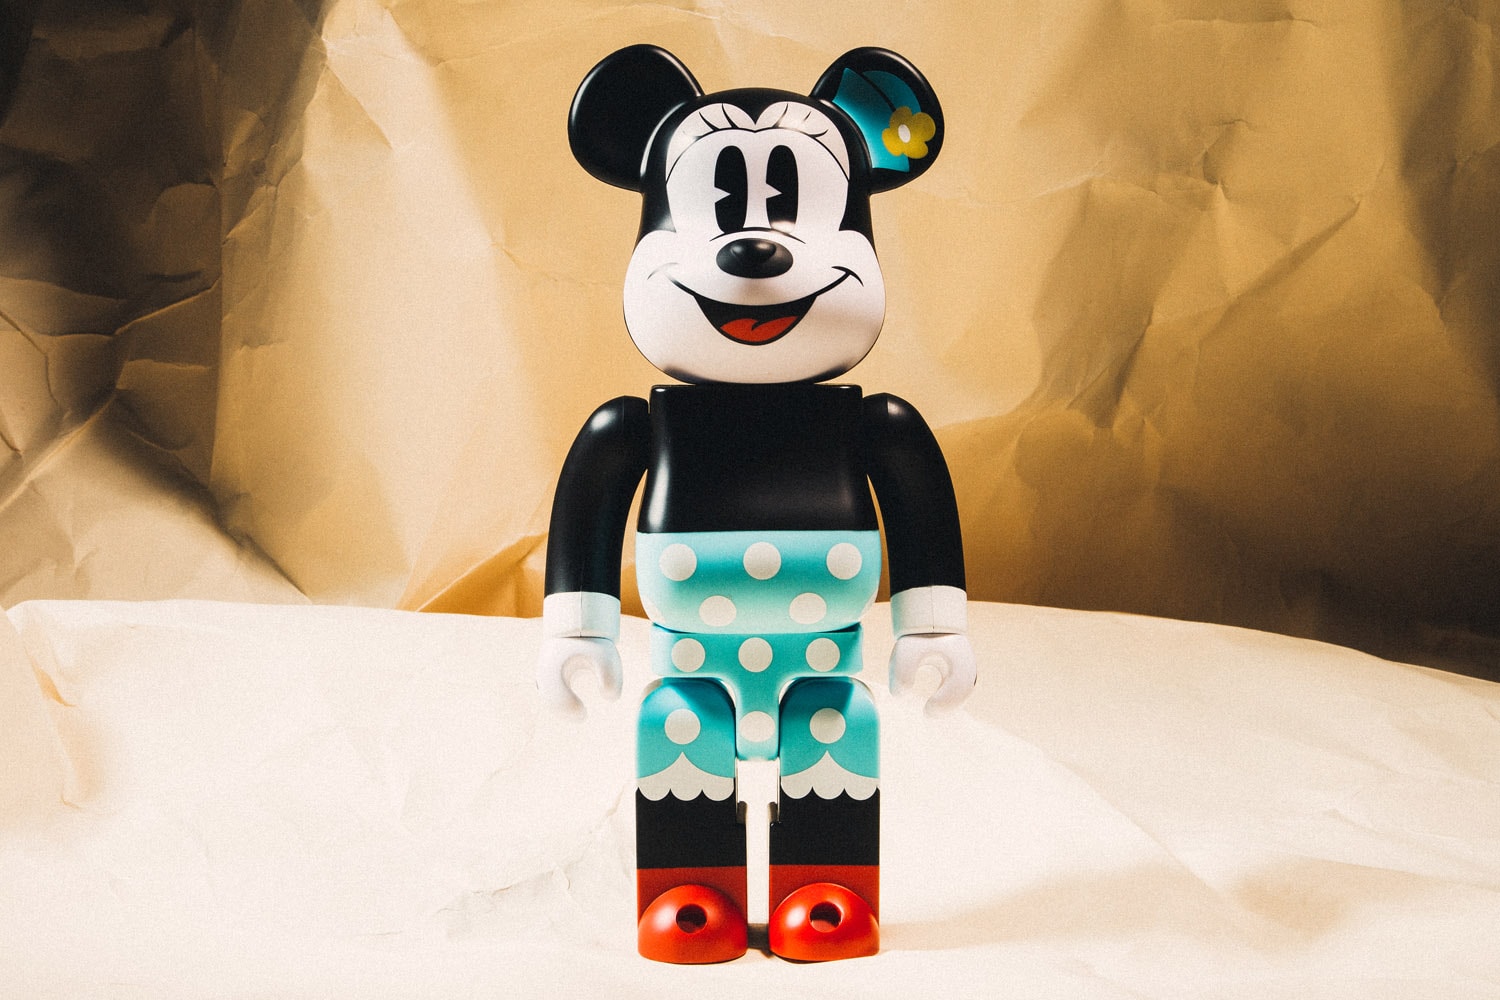 Mickey Mouse Minnie Mouse BE@RBRICKS Medicom Toy HBX 400% Toys Statues Figurines Collectibles Bearbricks